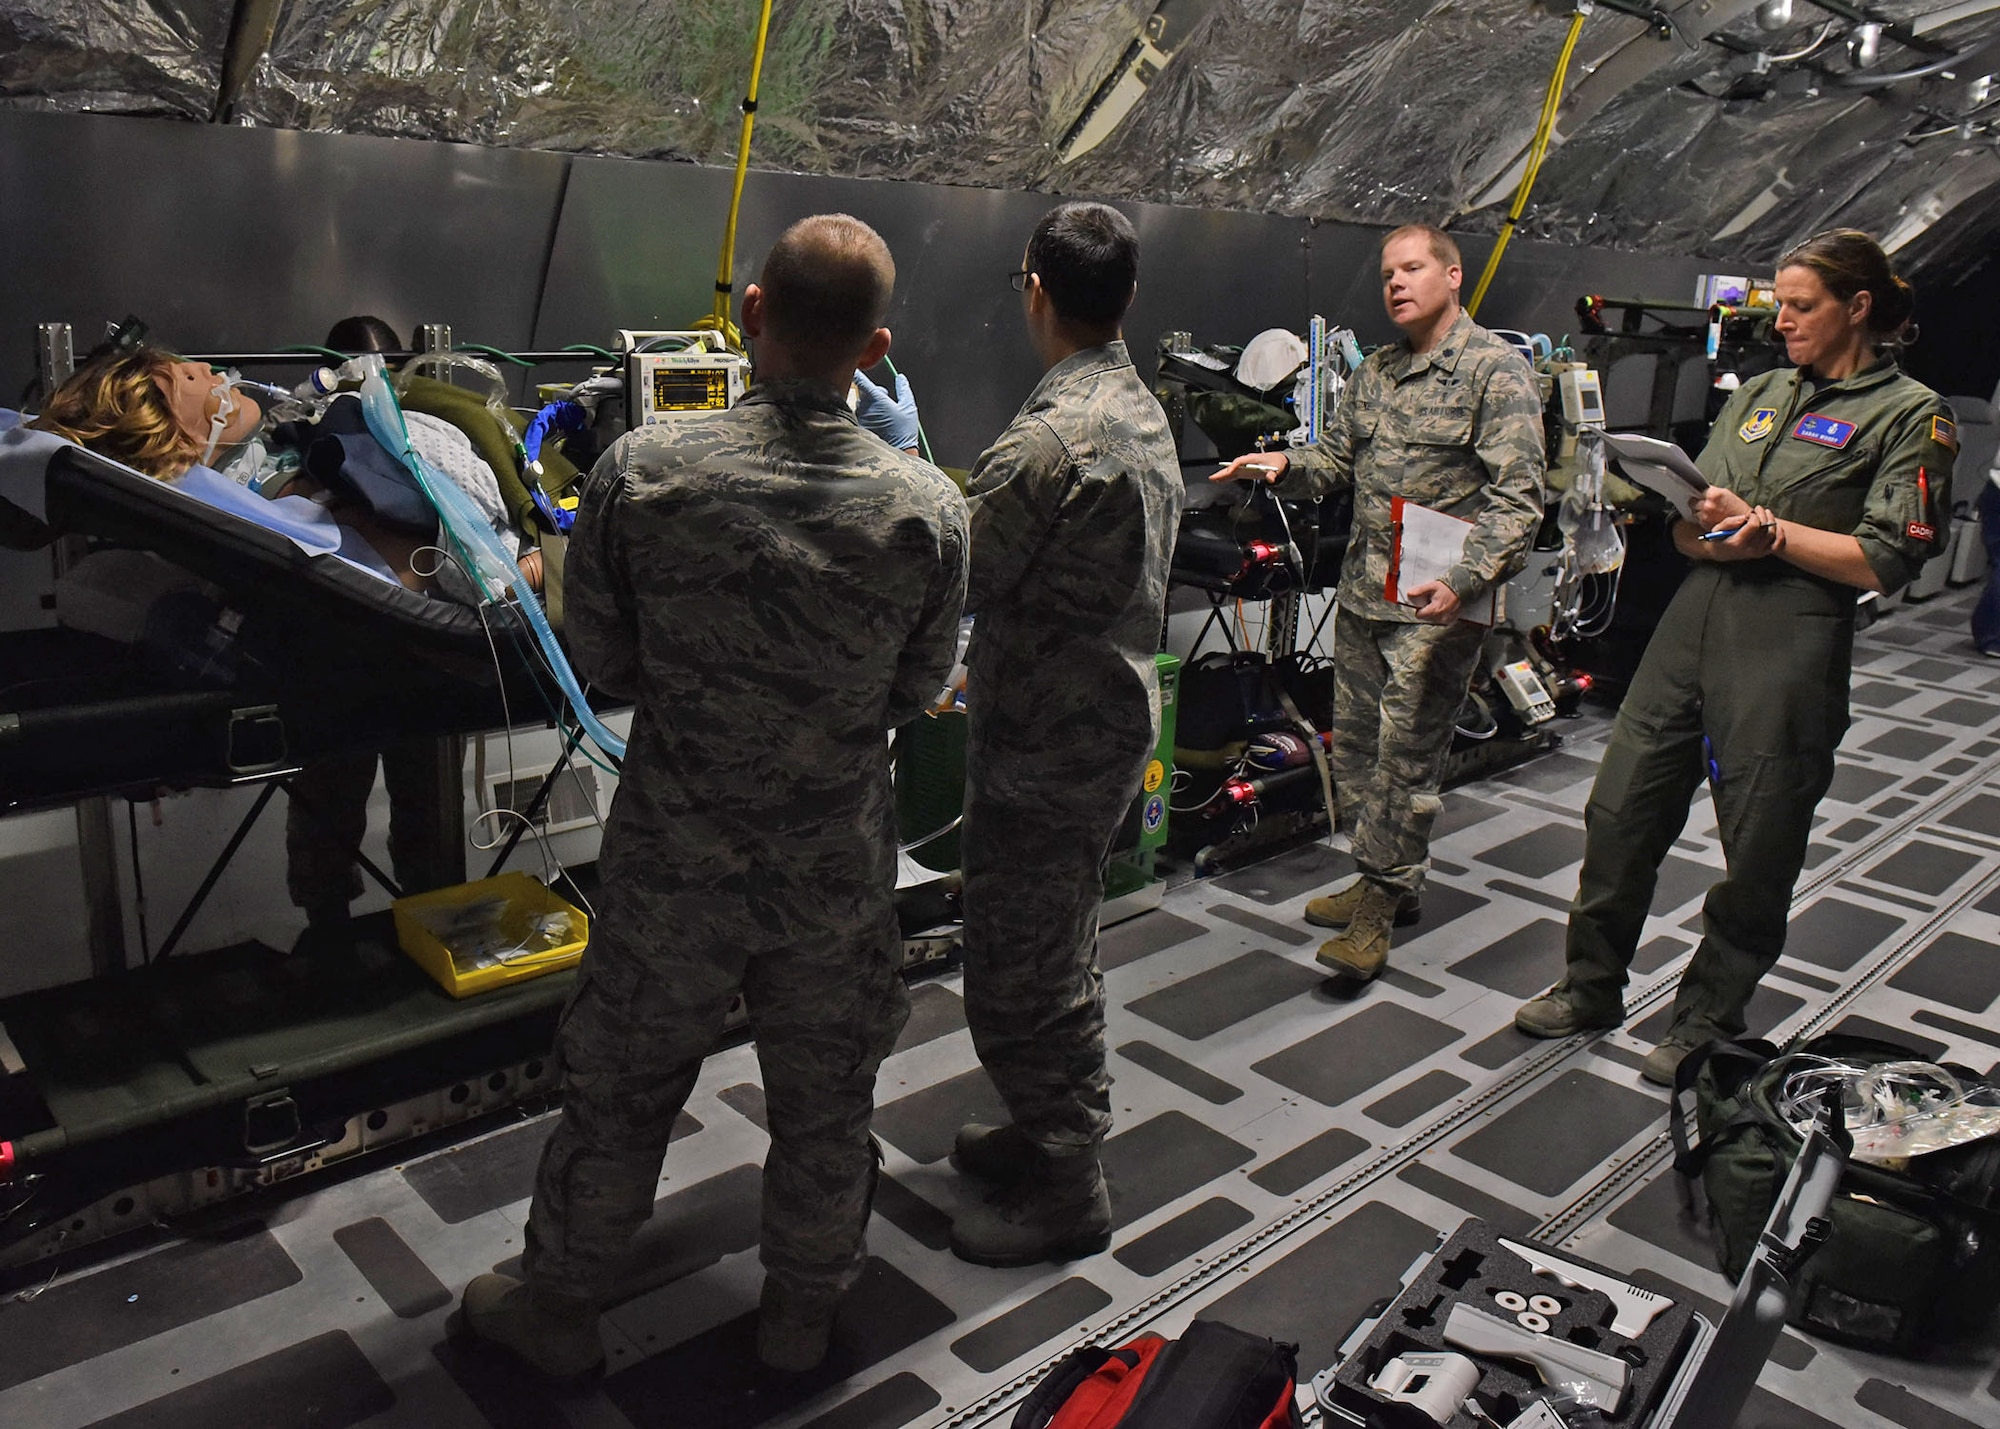 U.S. Air Force Lt. Col. Greg Malone, Critical Care Air Transport medical director at the U.S. Air Force School of Aerospace Medicine, 711th Human Performance Wing, speaks to a CCAT team after evaluating their clinical skills during CCAT training inside the USAFSAM lab at Wright-Patterson Air Force Base, Ohio, Dec. 8, 2017. The students were being evaluated on preparing a simulated patient for flight. (U.S. Air Force photo by Michelle Gigante)